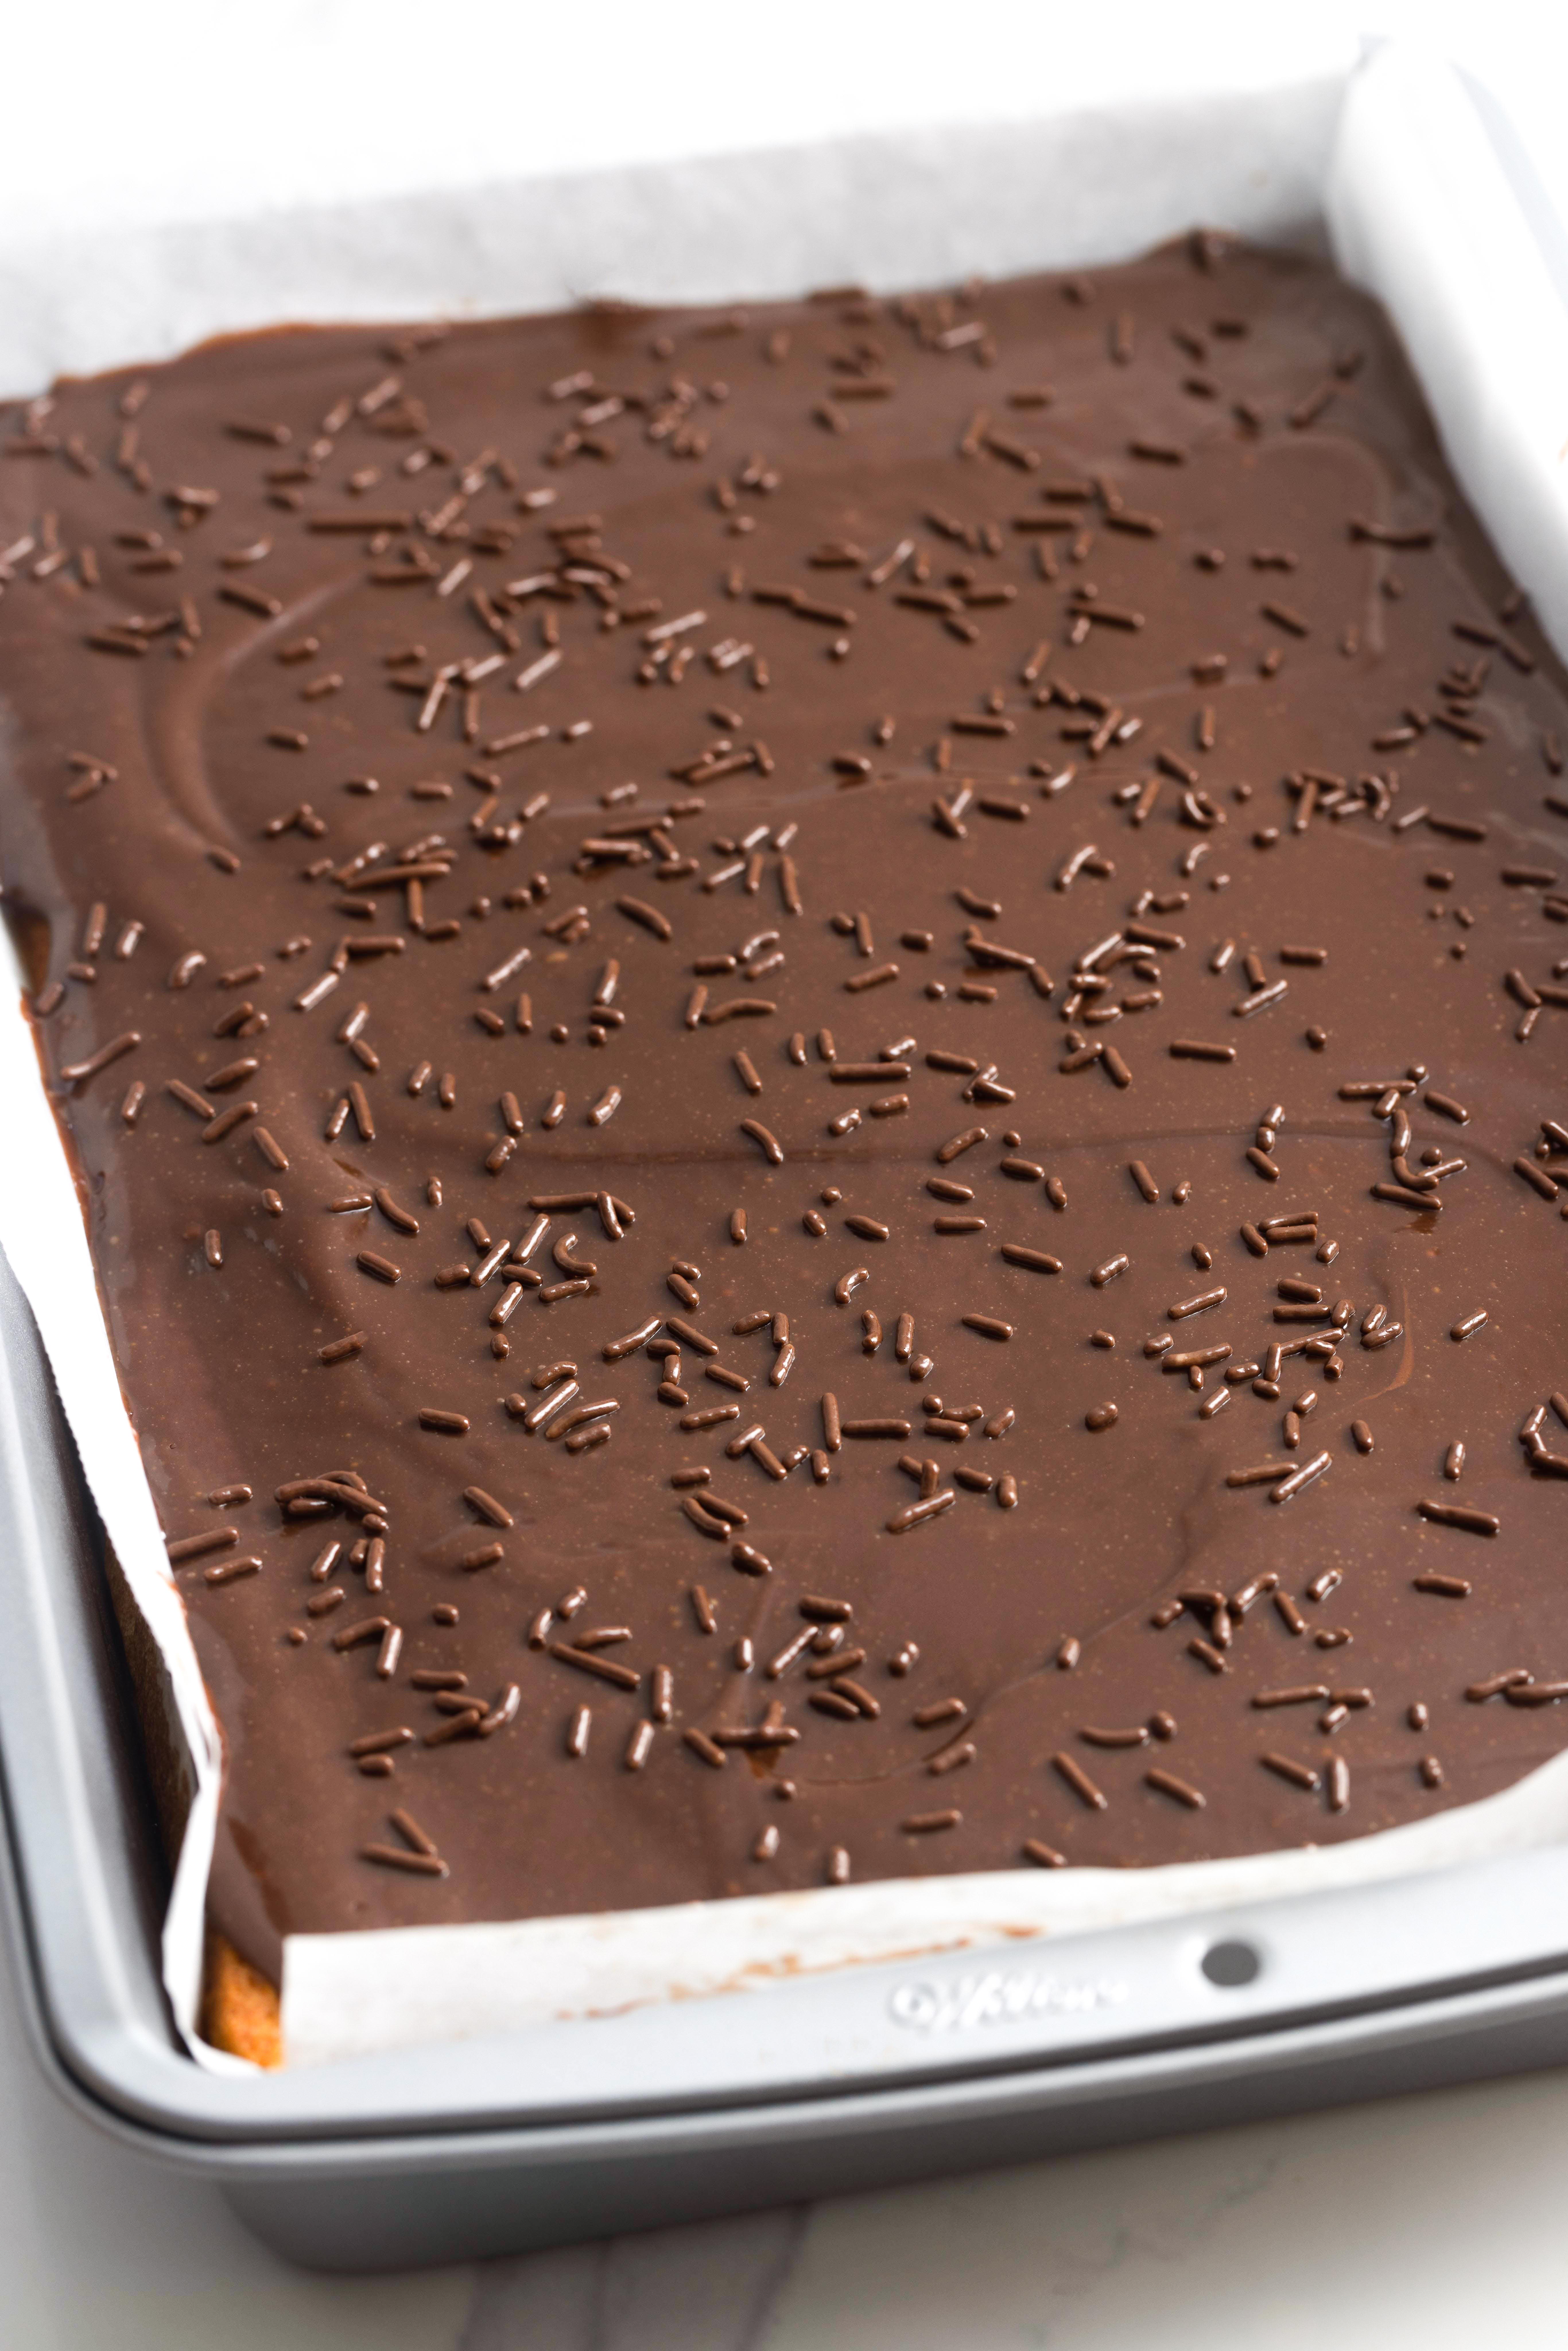 Brazilian carrot cake topped with chocolate frosting and chocolate sprinkles in a 9x13 cake pan.